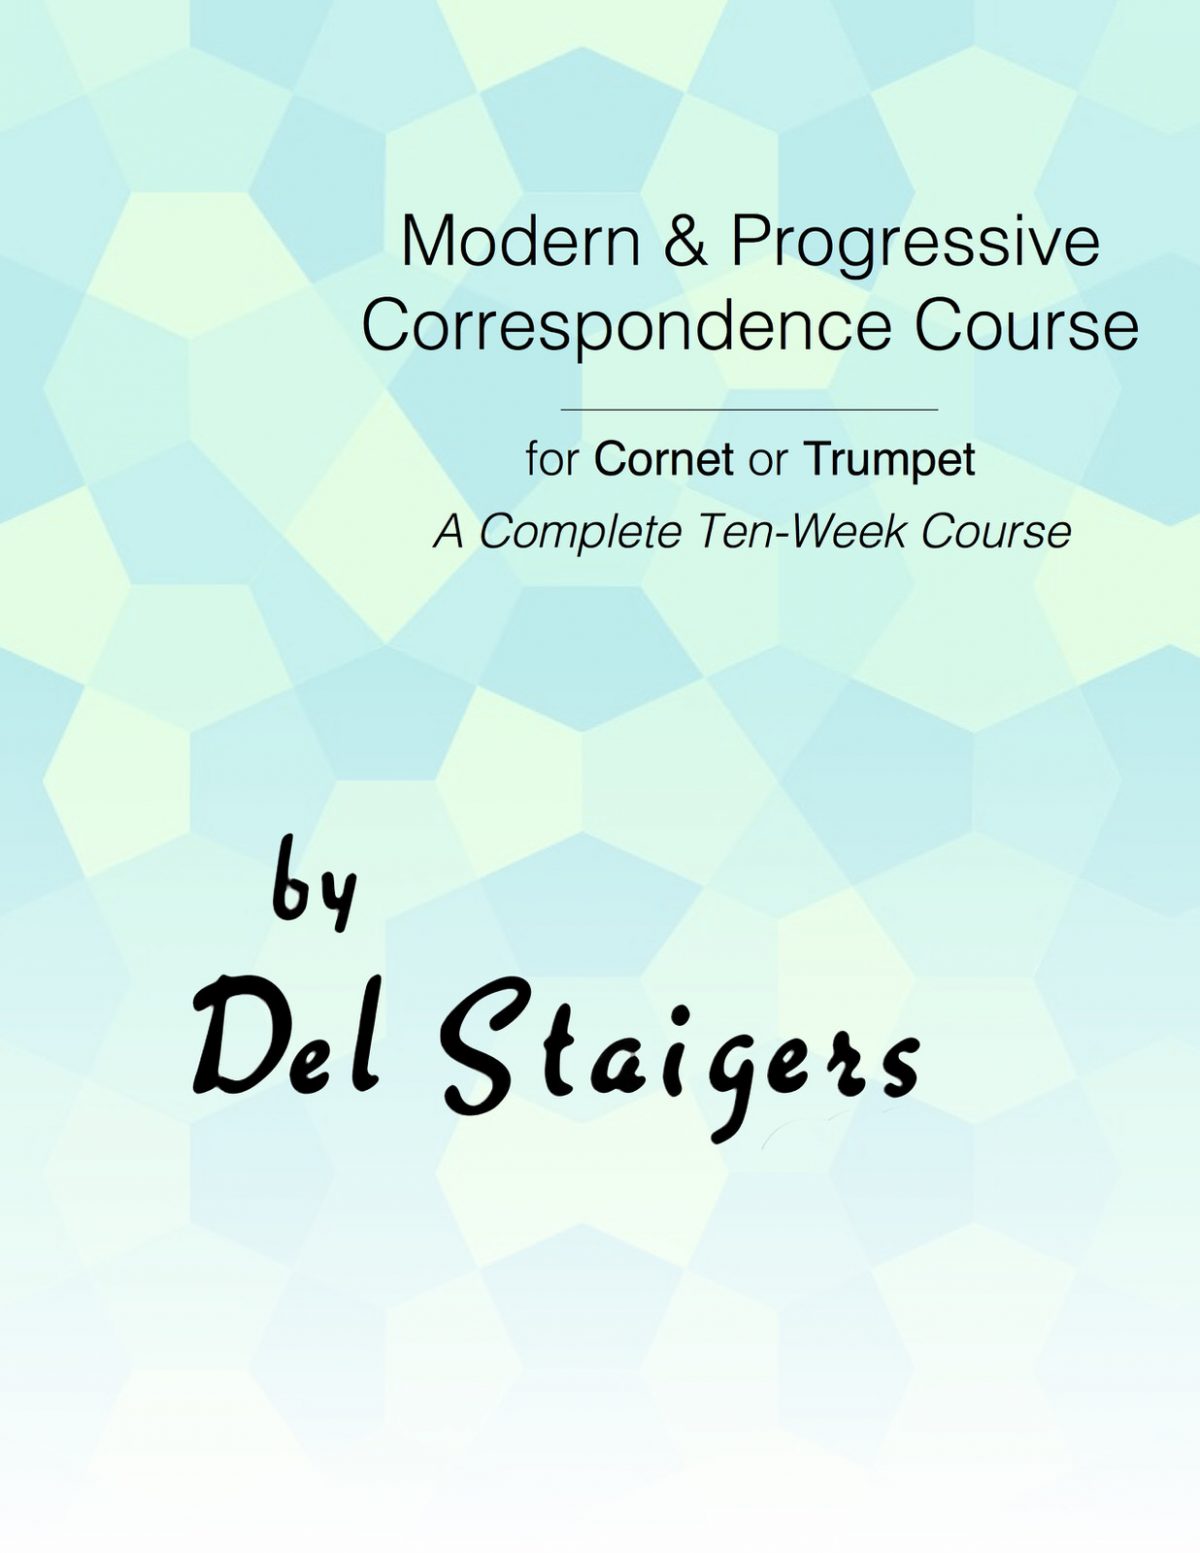 staigers-modern-and-progressive-correspondence-course